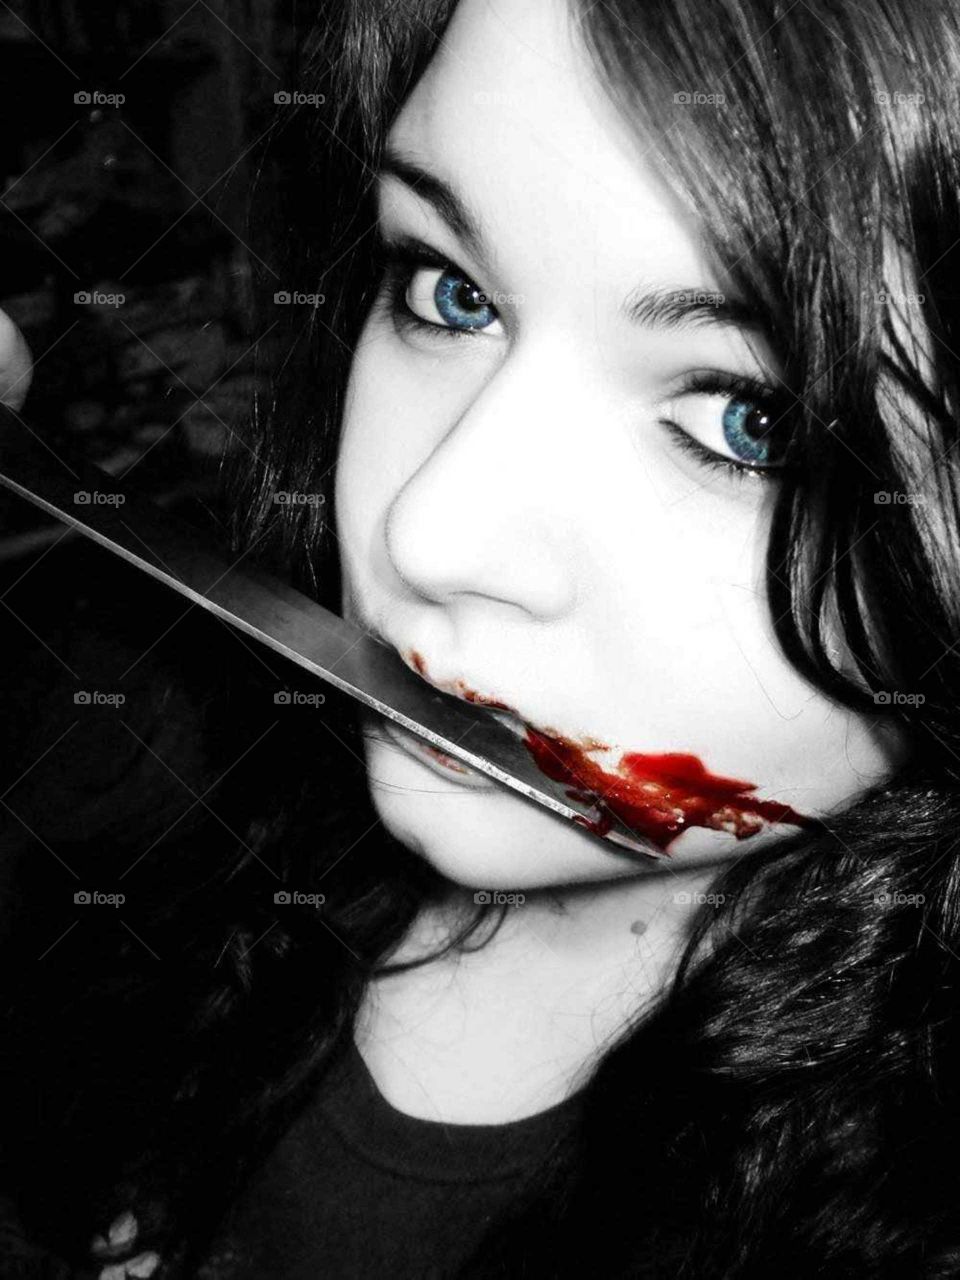 bloody knife 2